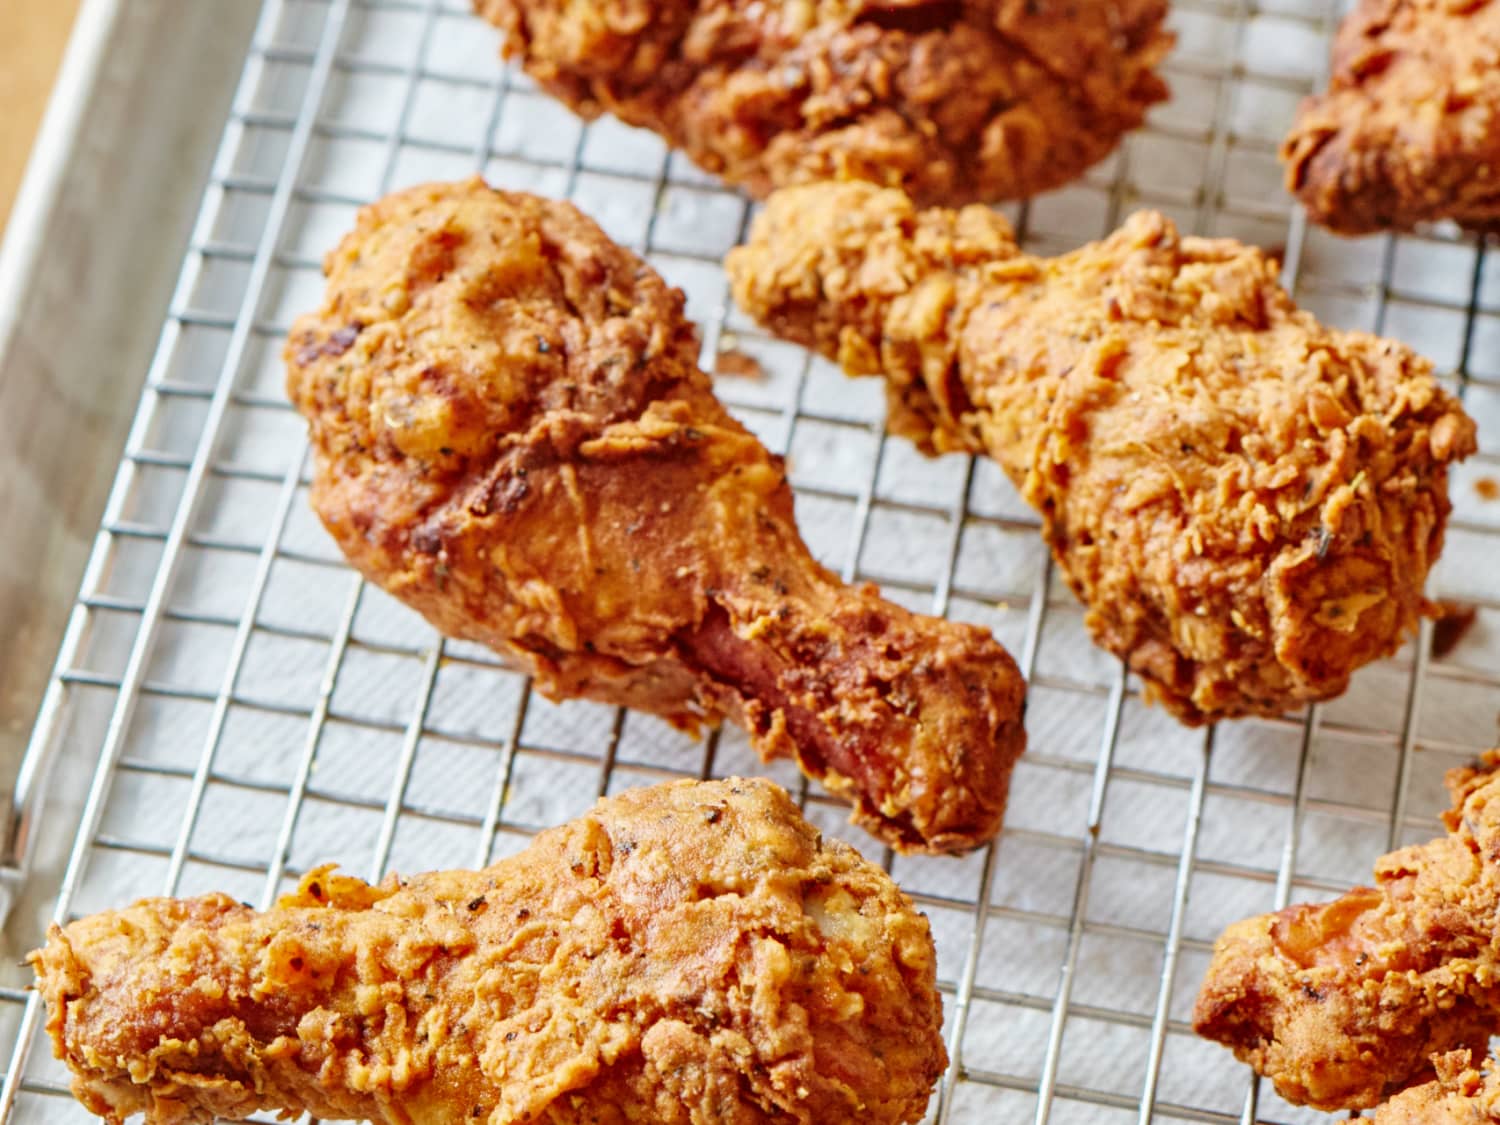 How To Make Crispy Juicy Fried Chicken That S Better Than Kfc Kitchn,Special Needs Mom Burnout